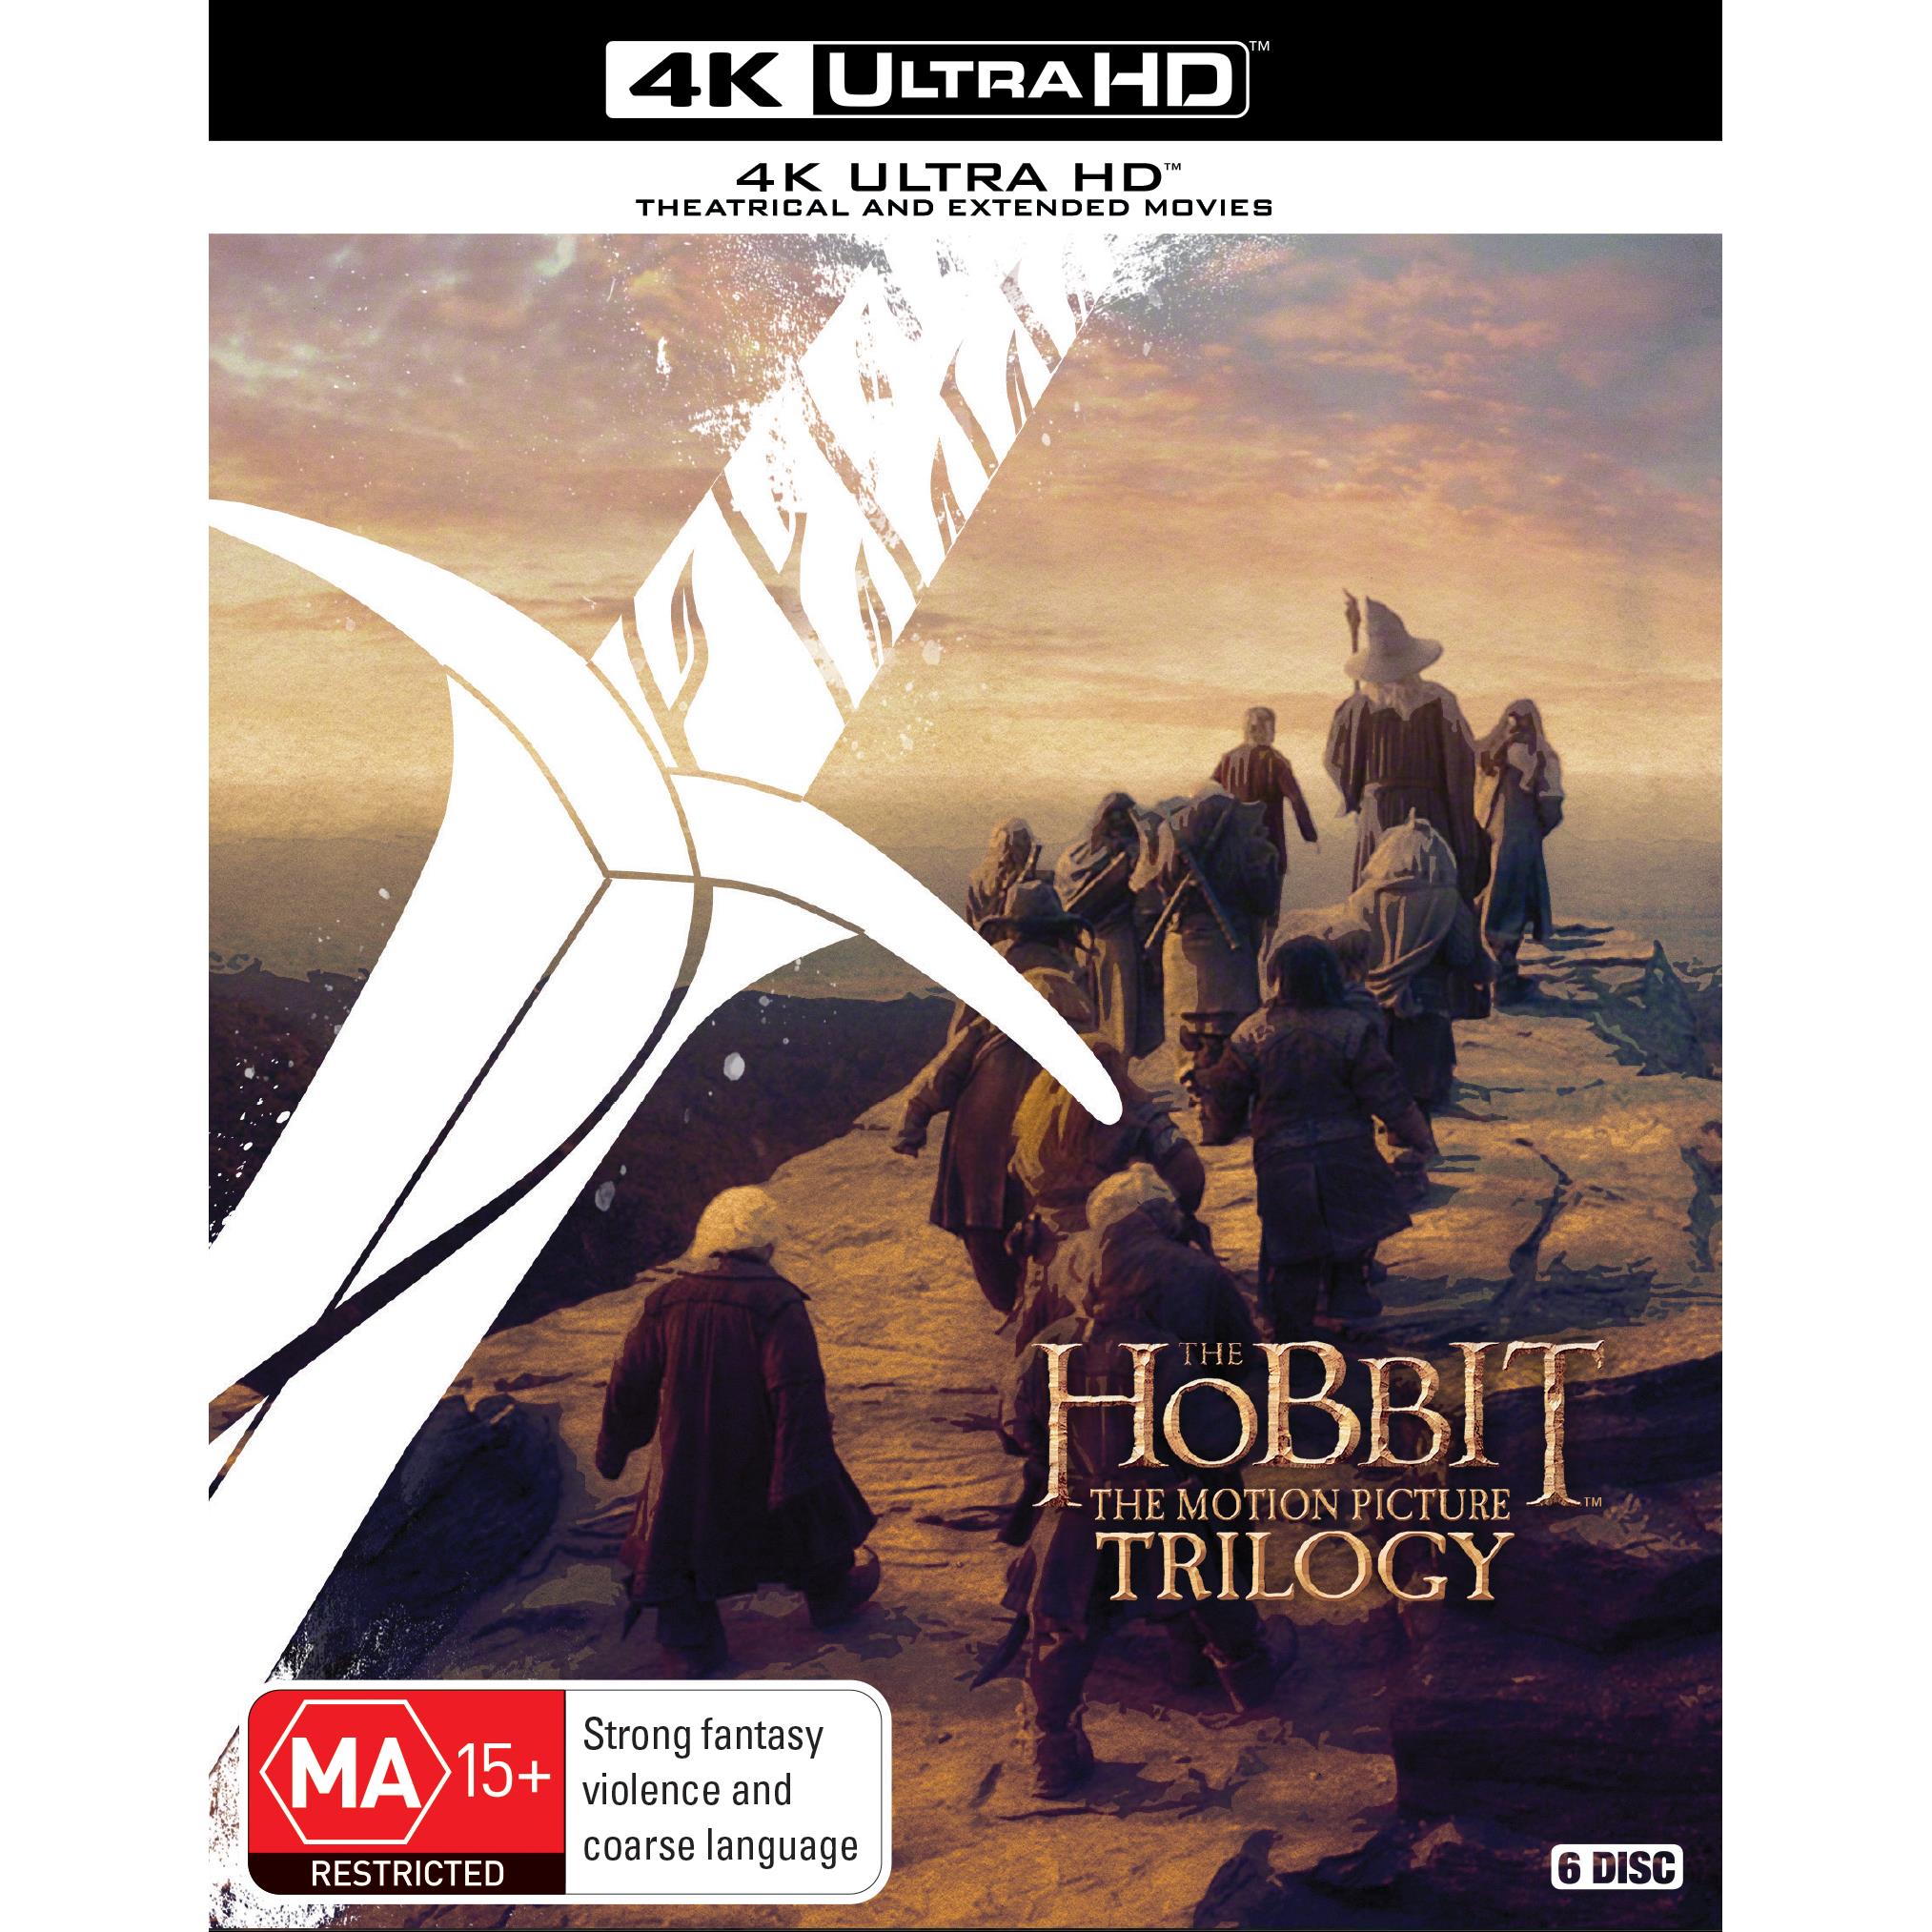 Buy The Hobbit: An Unexpected Journey - Microsoft Store